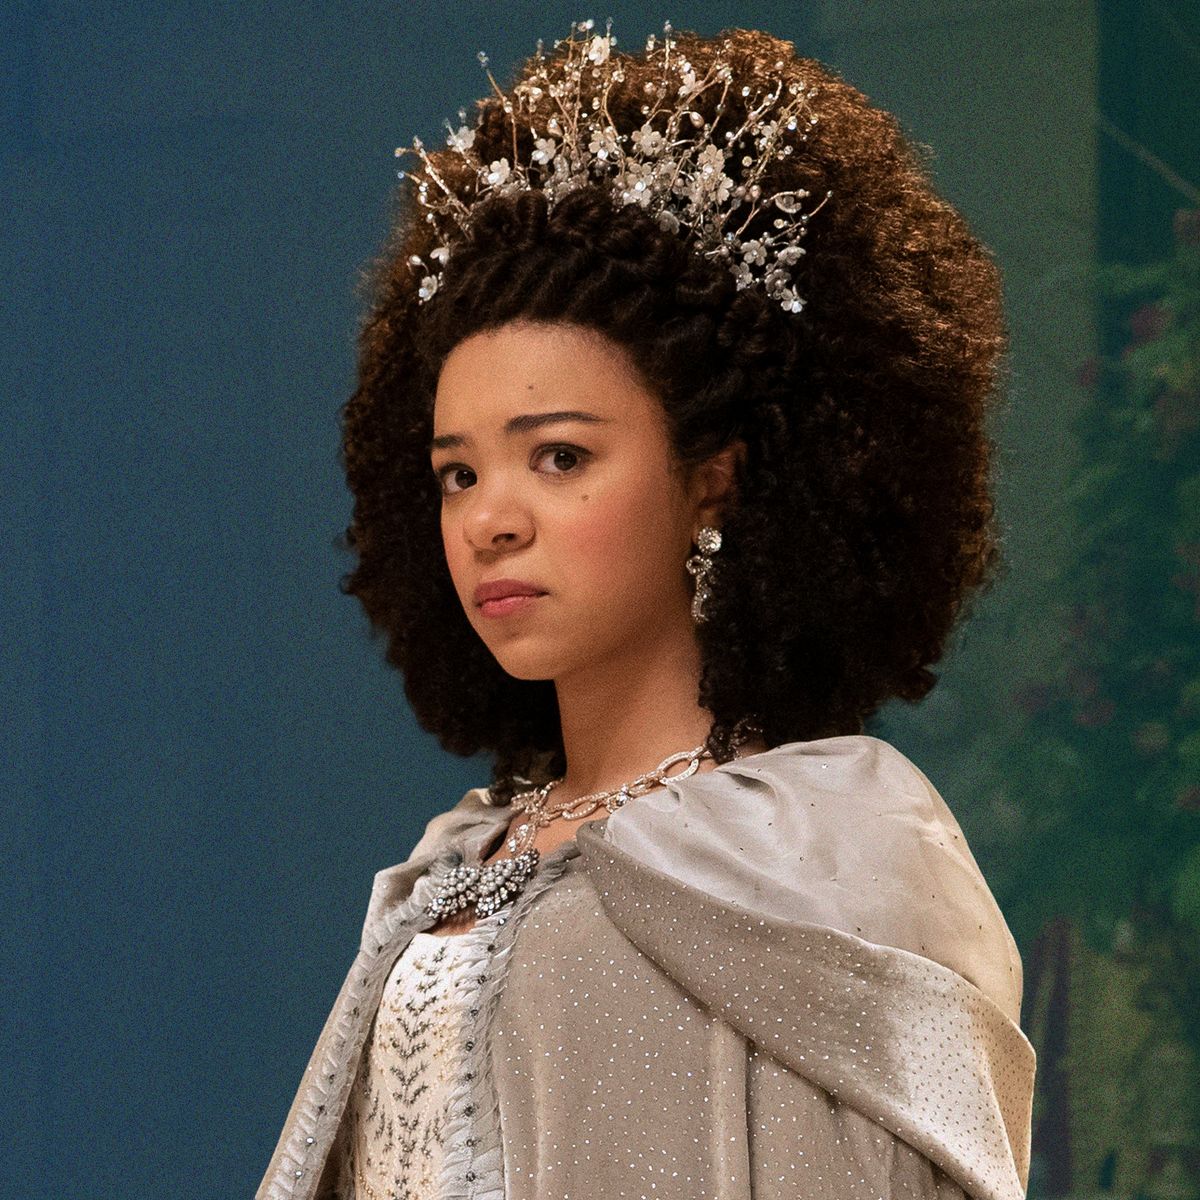 india amarteifio as young queen charlotte